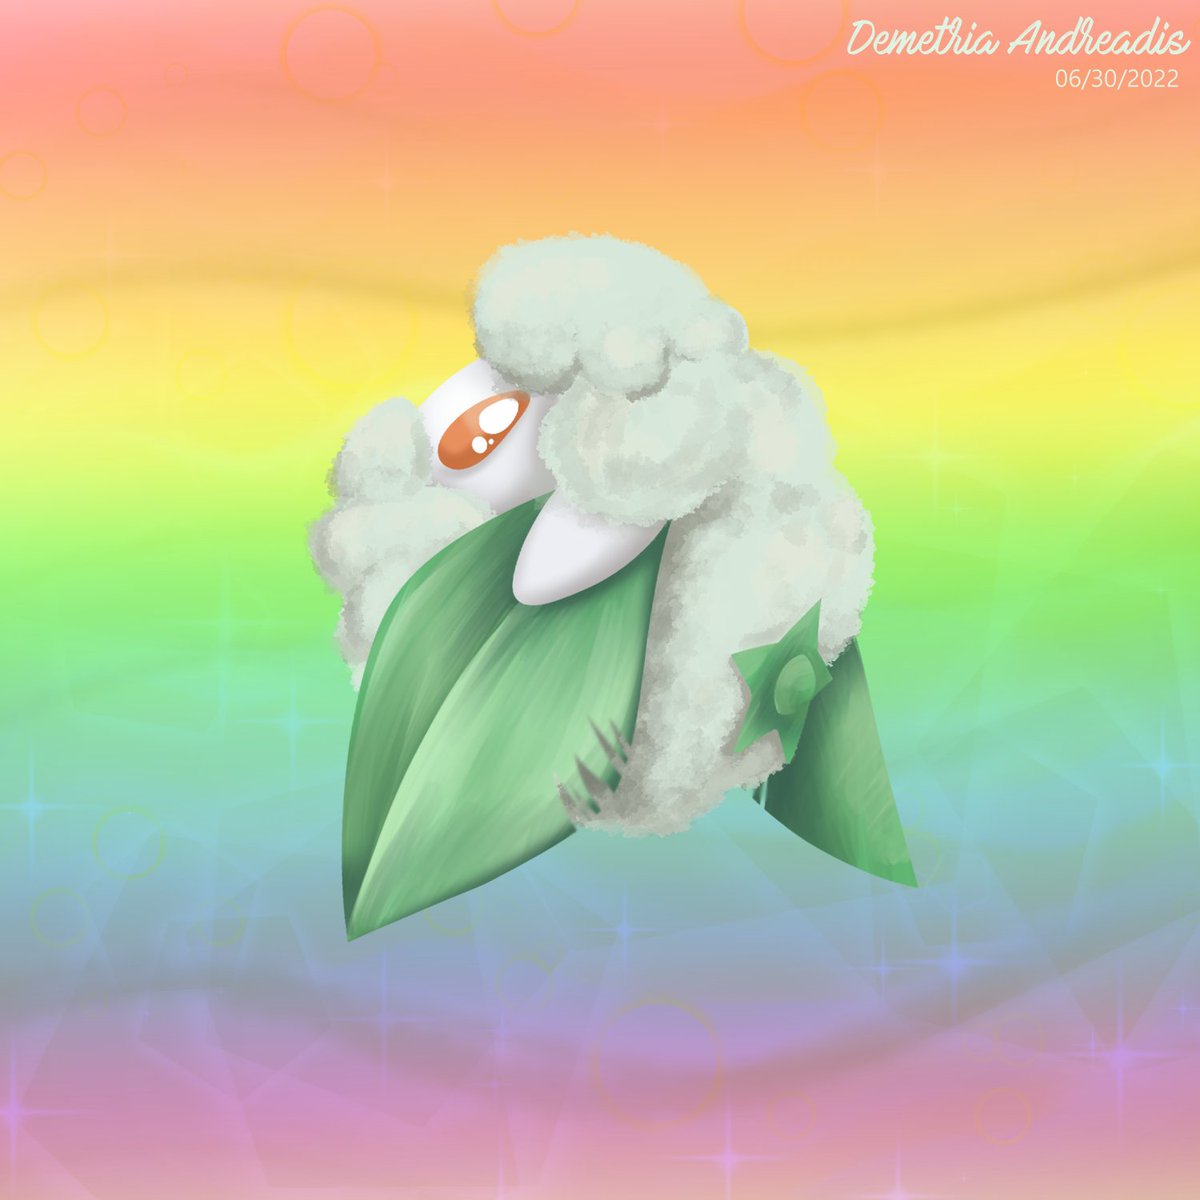 Drawing Once a Day in 2022, Pokémon 546: Cottonee

#Cottonee #PokemonGo #Pokemon #shinypokemon #pokemon #Dailydrawing #DrawDaily #shiny #DailyDrawingChallenge #happyPride2022